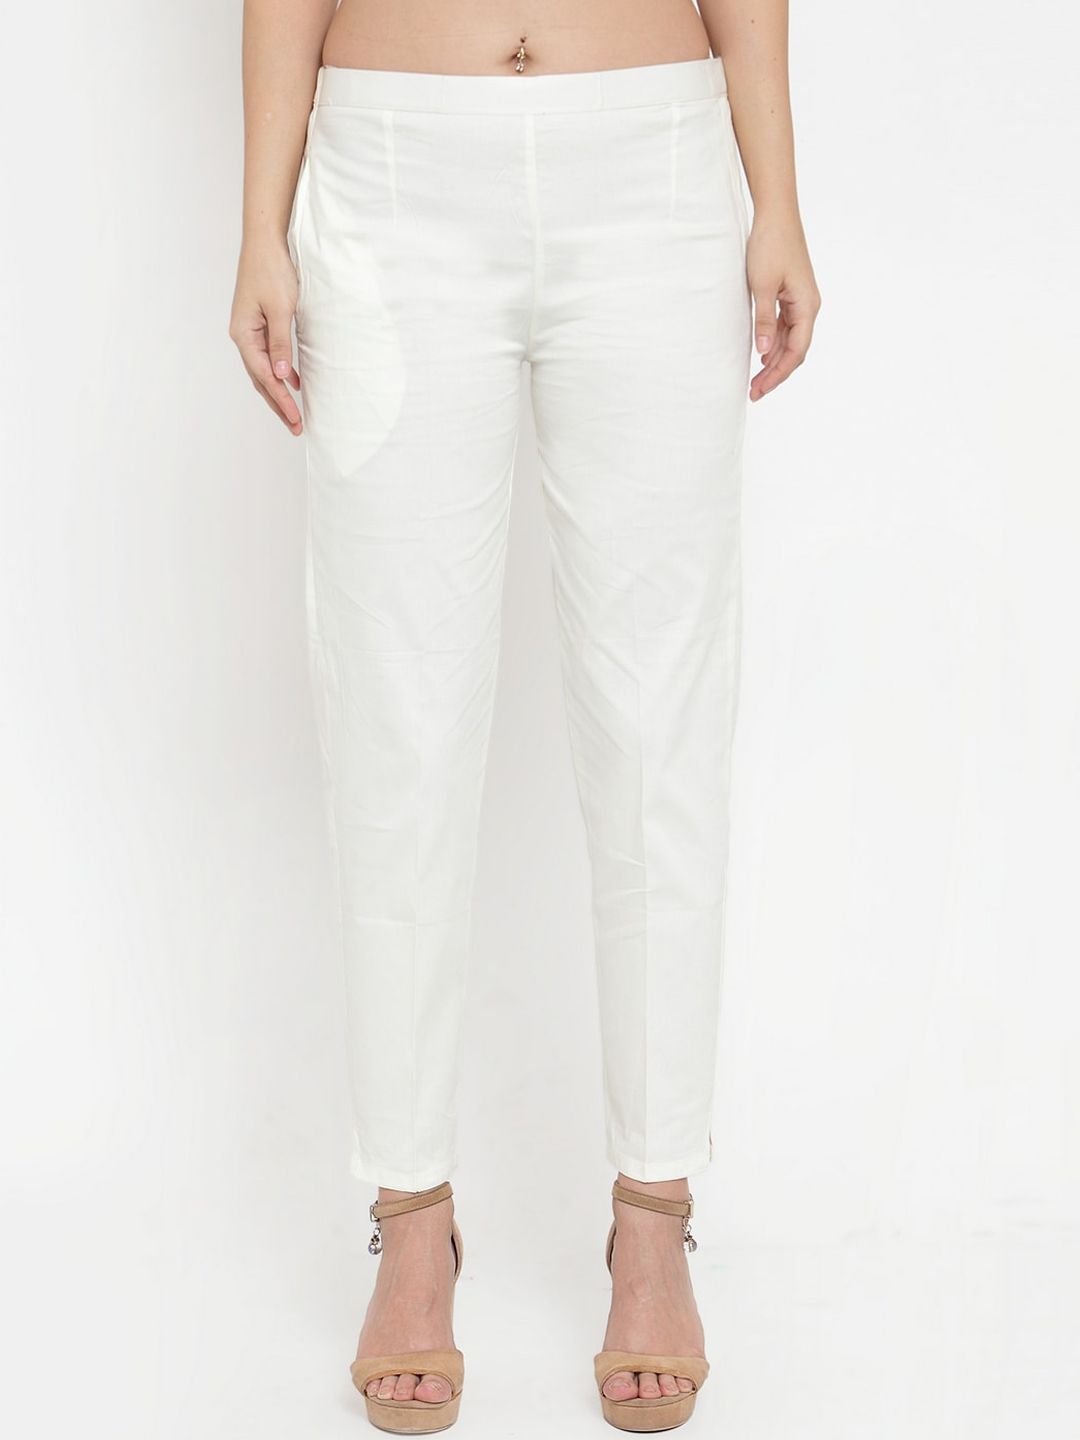 Clora Creation Women Off White Trousers Price in India